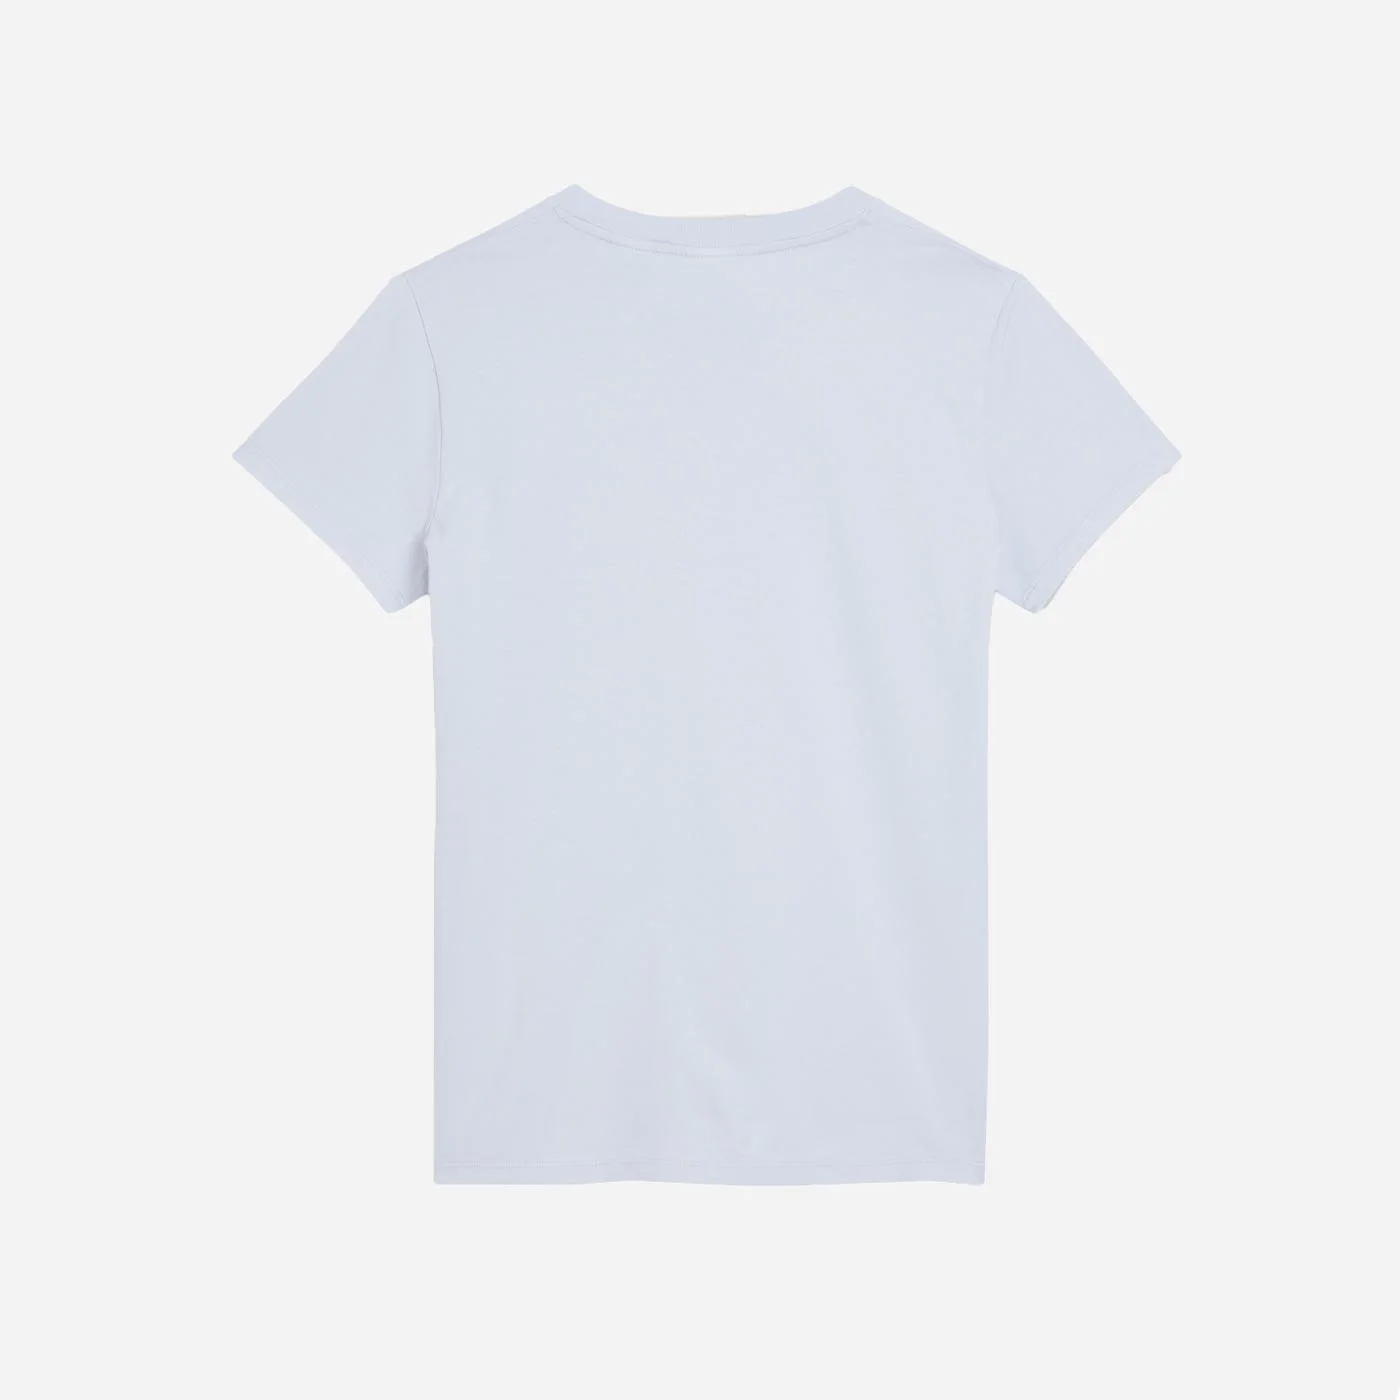 Levis Women's Perfect Tee - Cool Dust